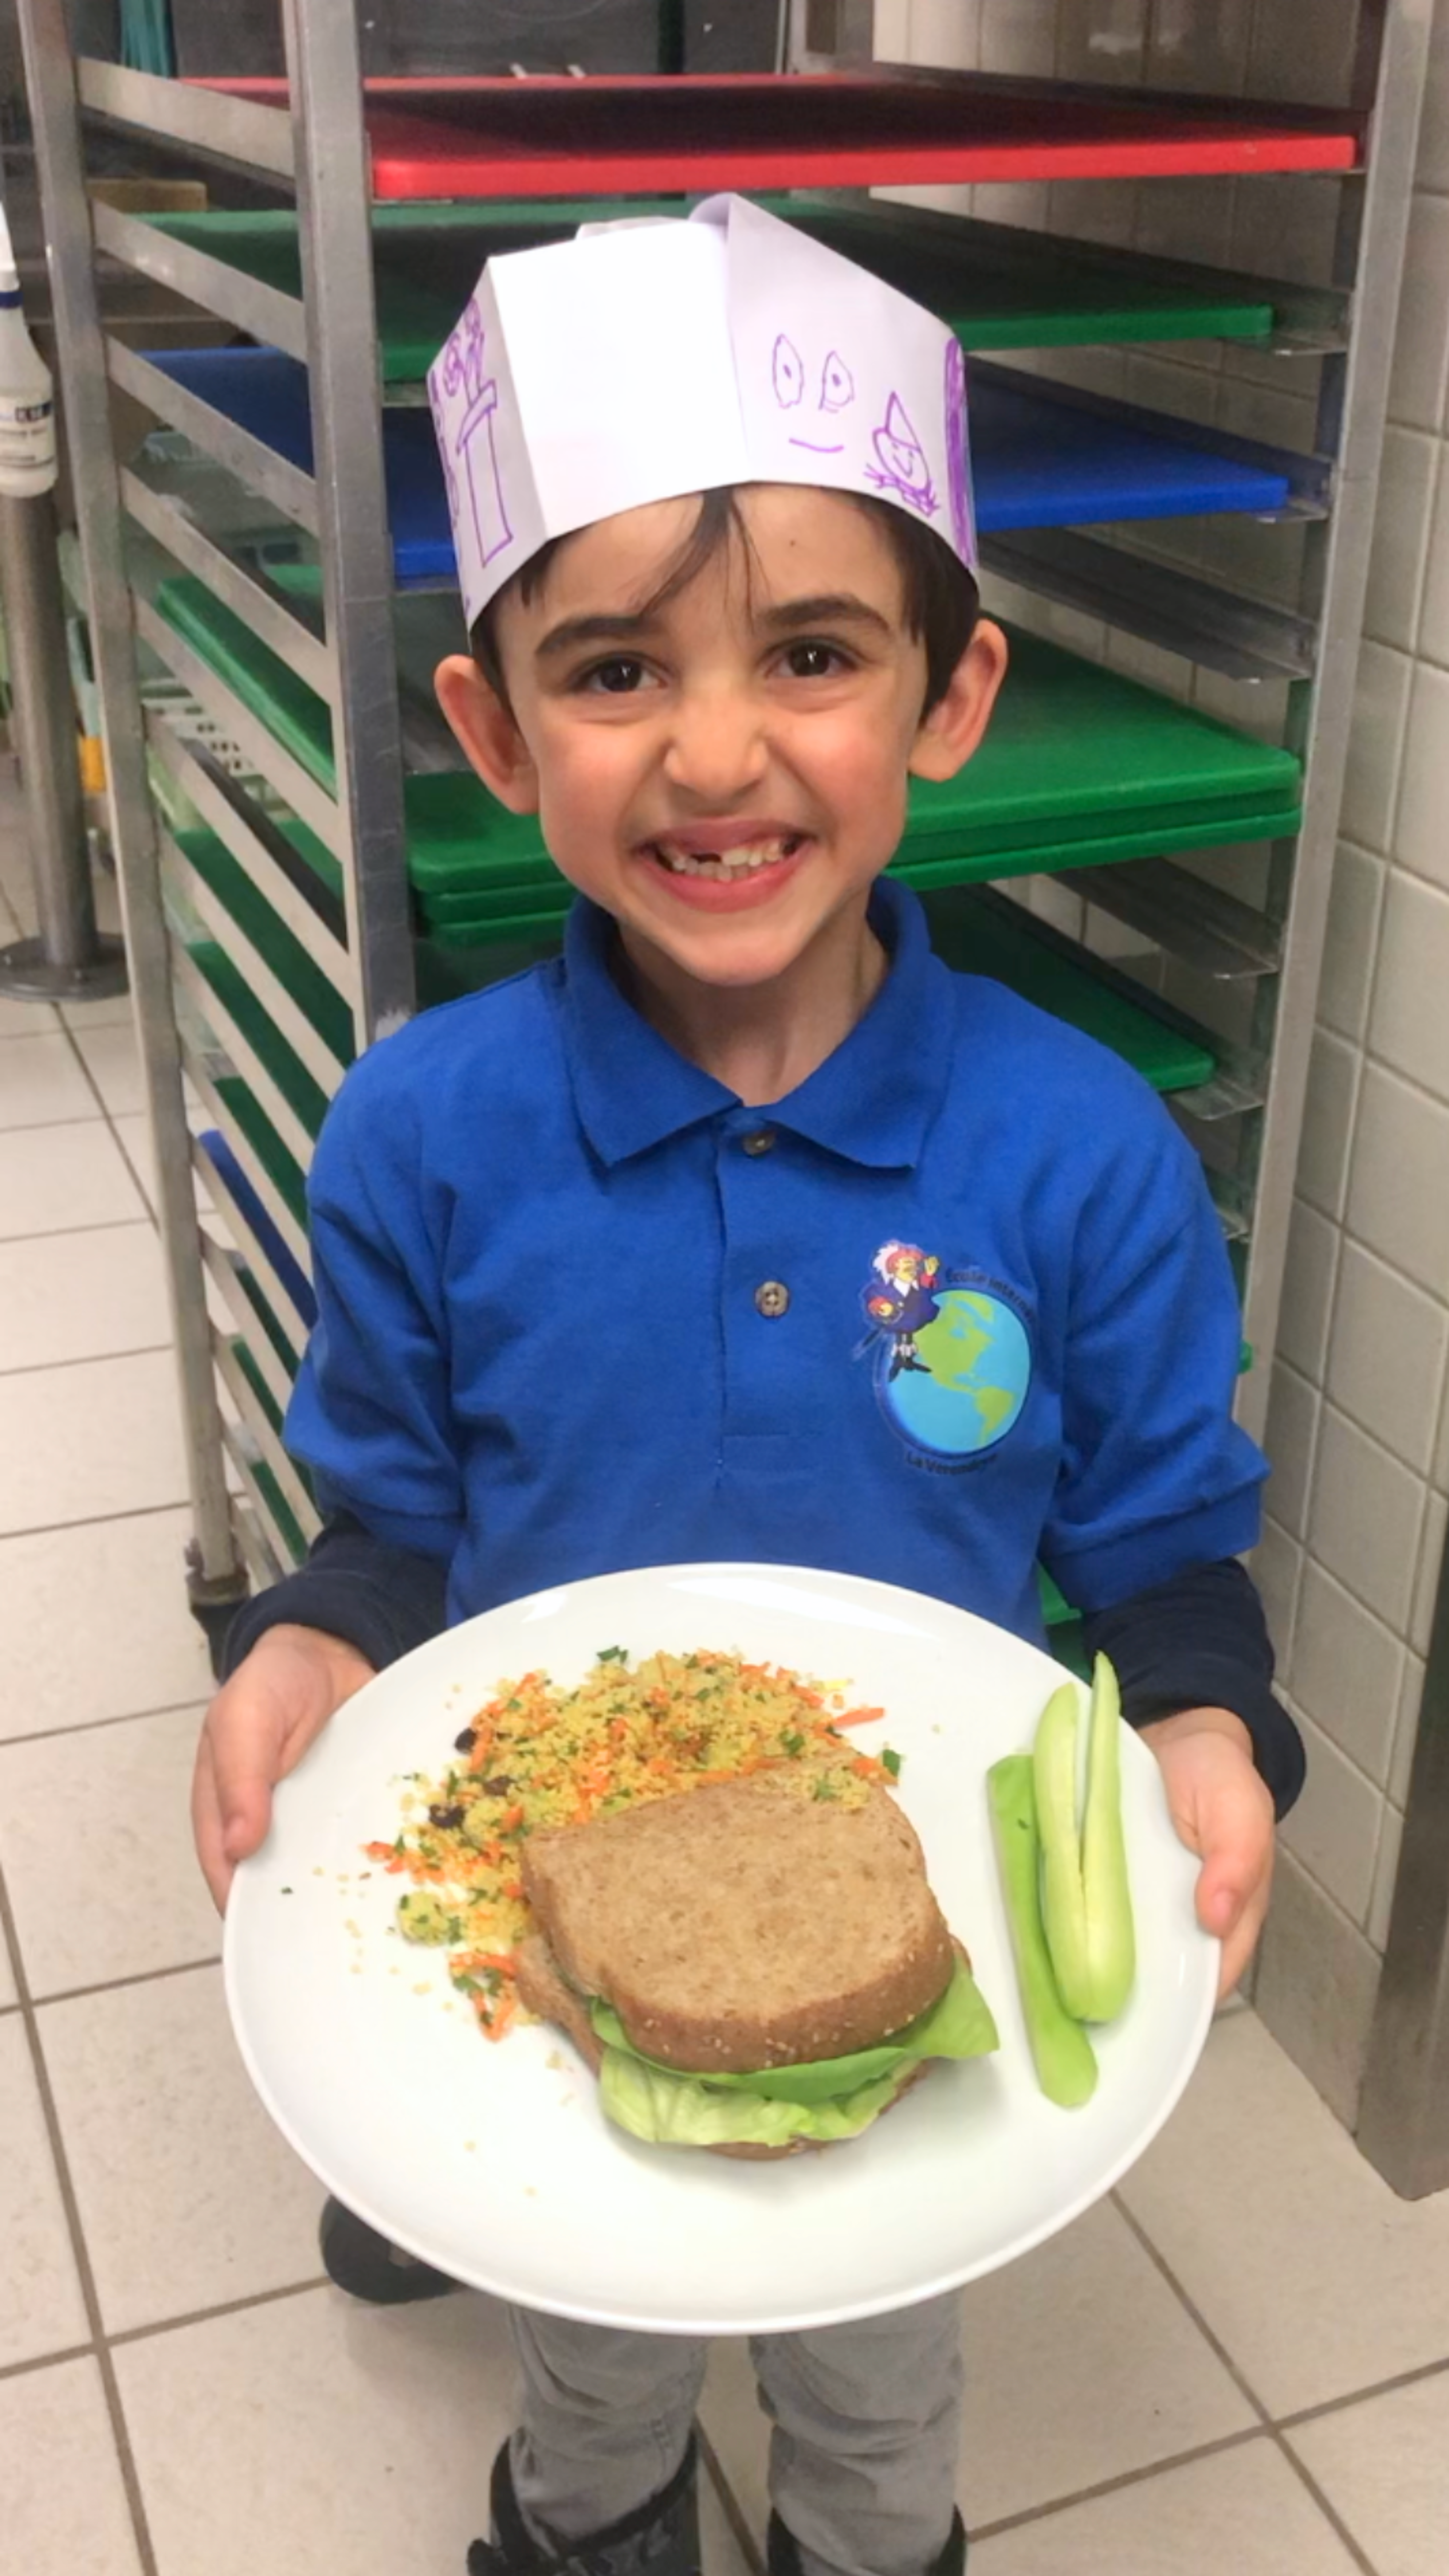 A smiling young boy in a chef's hat presenting a homemade sandwich with veggies on a plate, exuding culinary excitement.